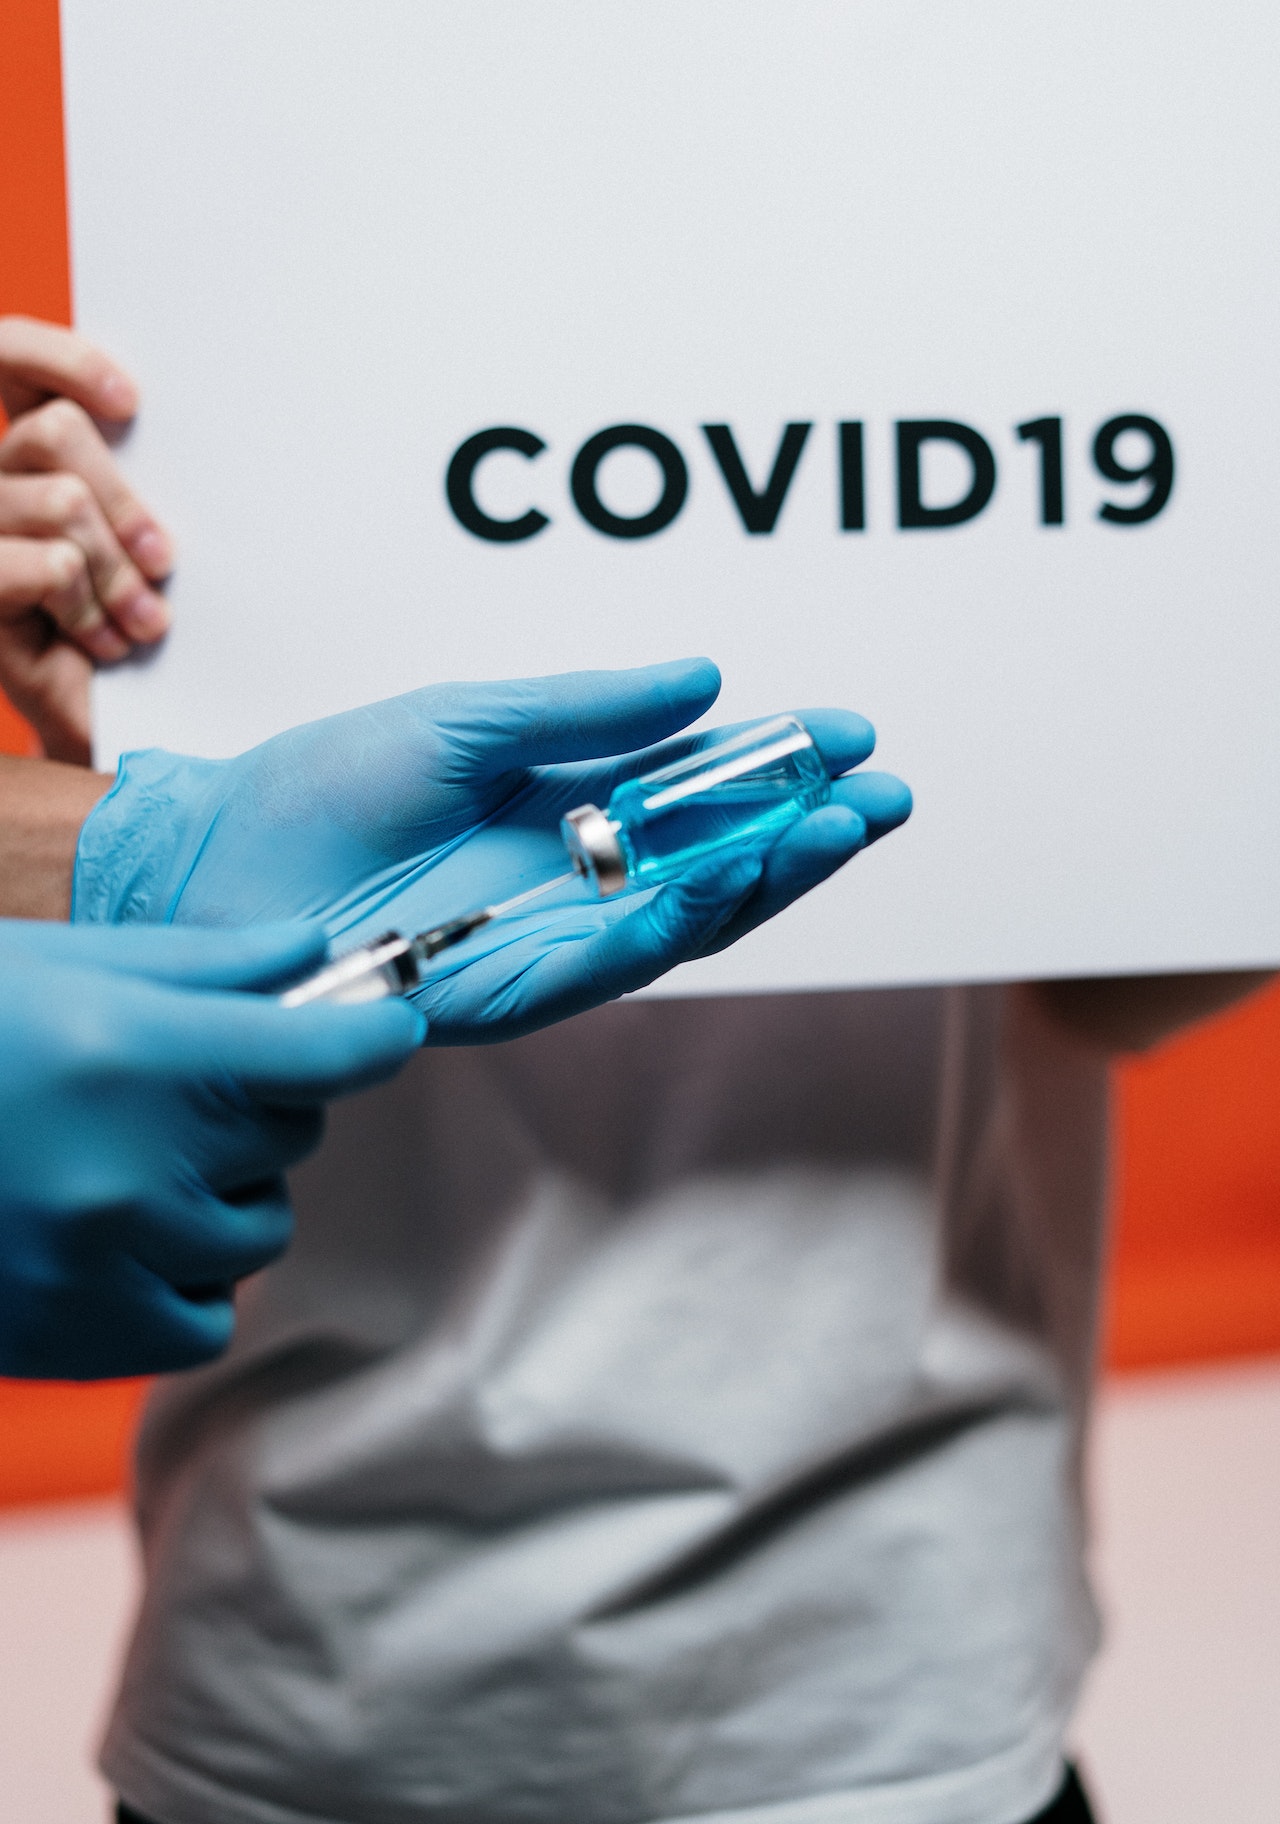 New COVID Vaccine Campaign to be launched